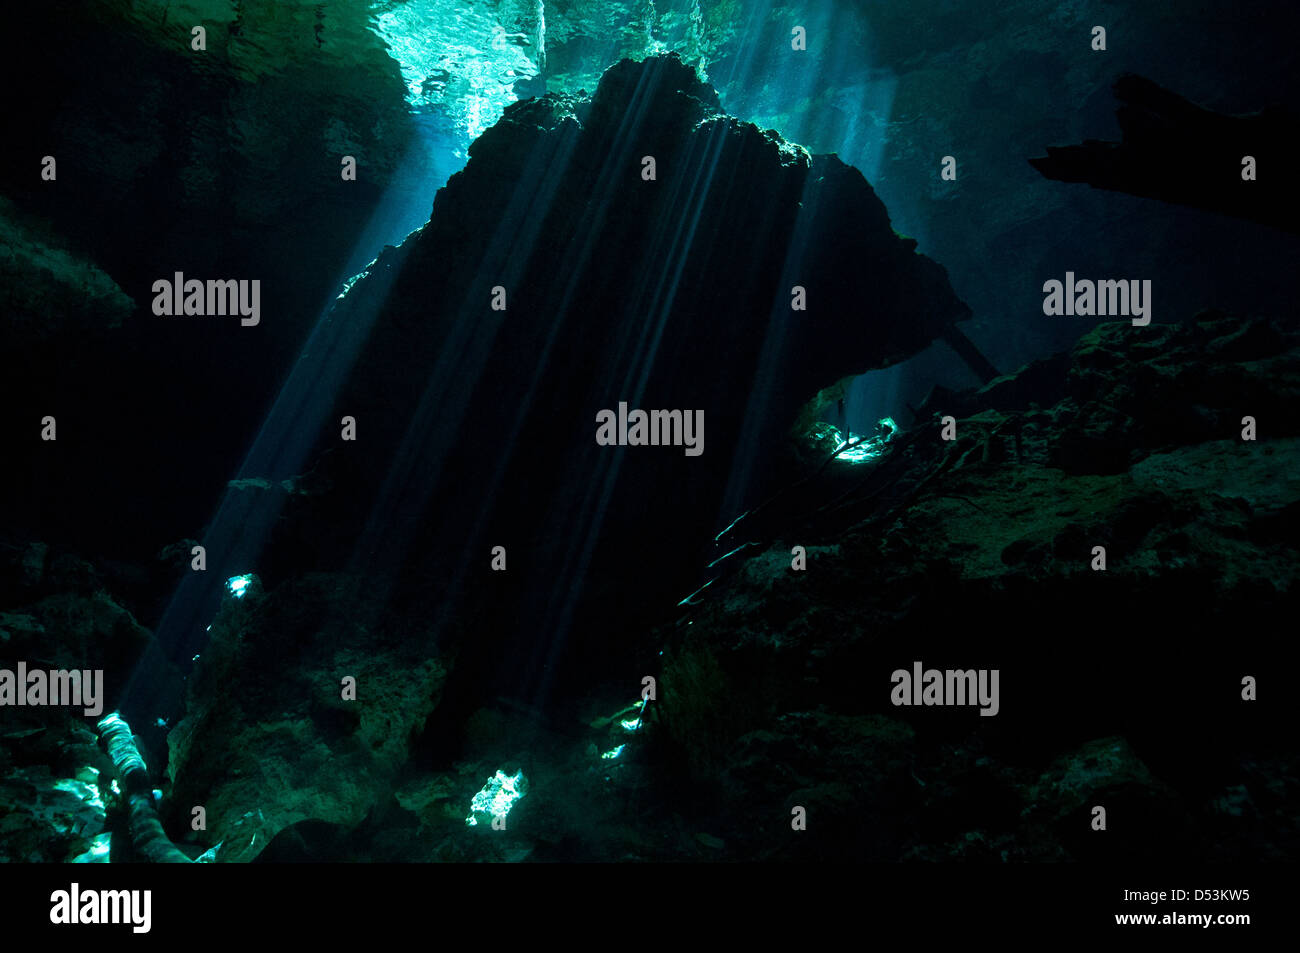 Cenote cave, rock formation underwater with ambient light and silhoettes Stock Photo